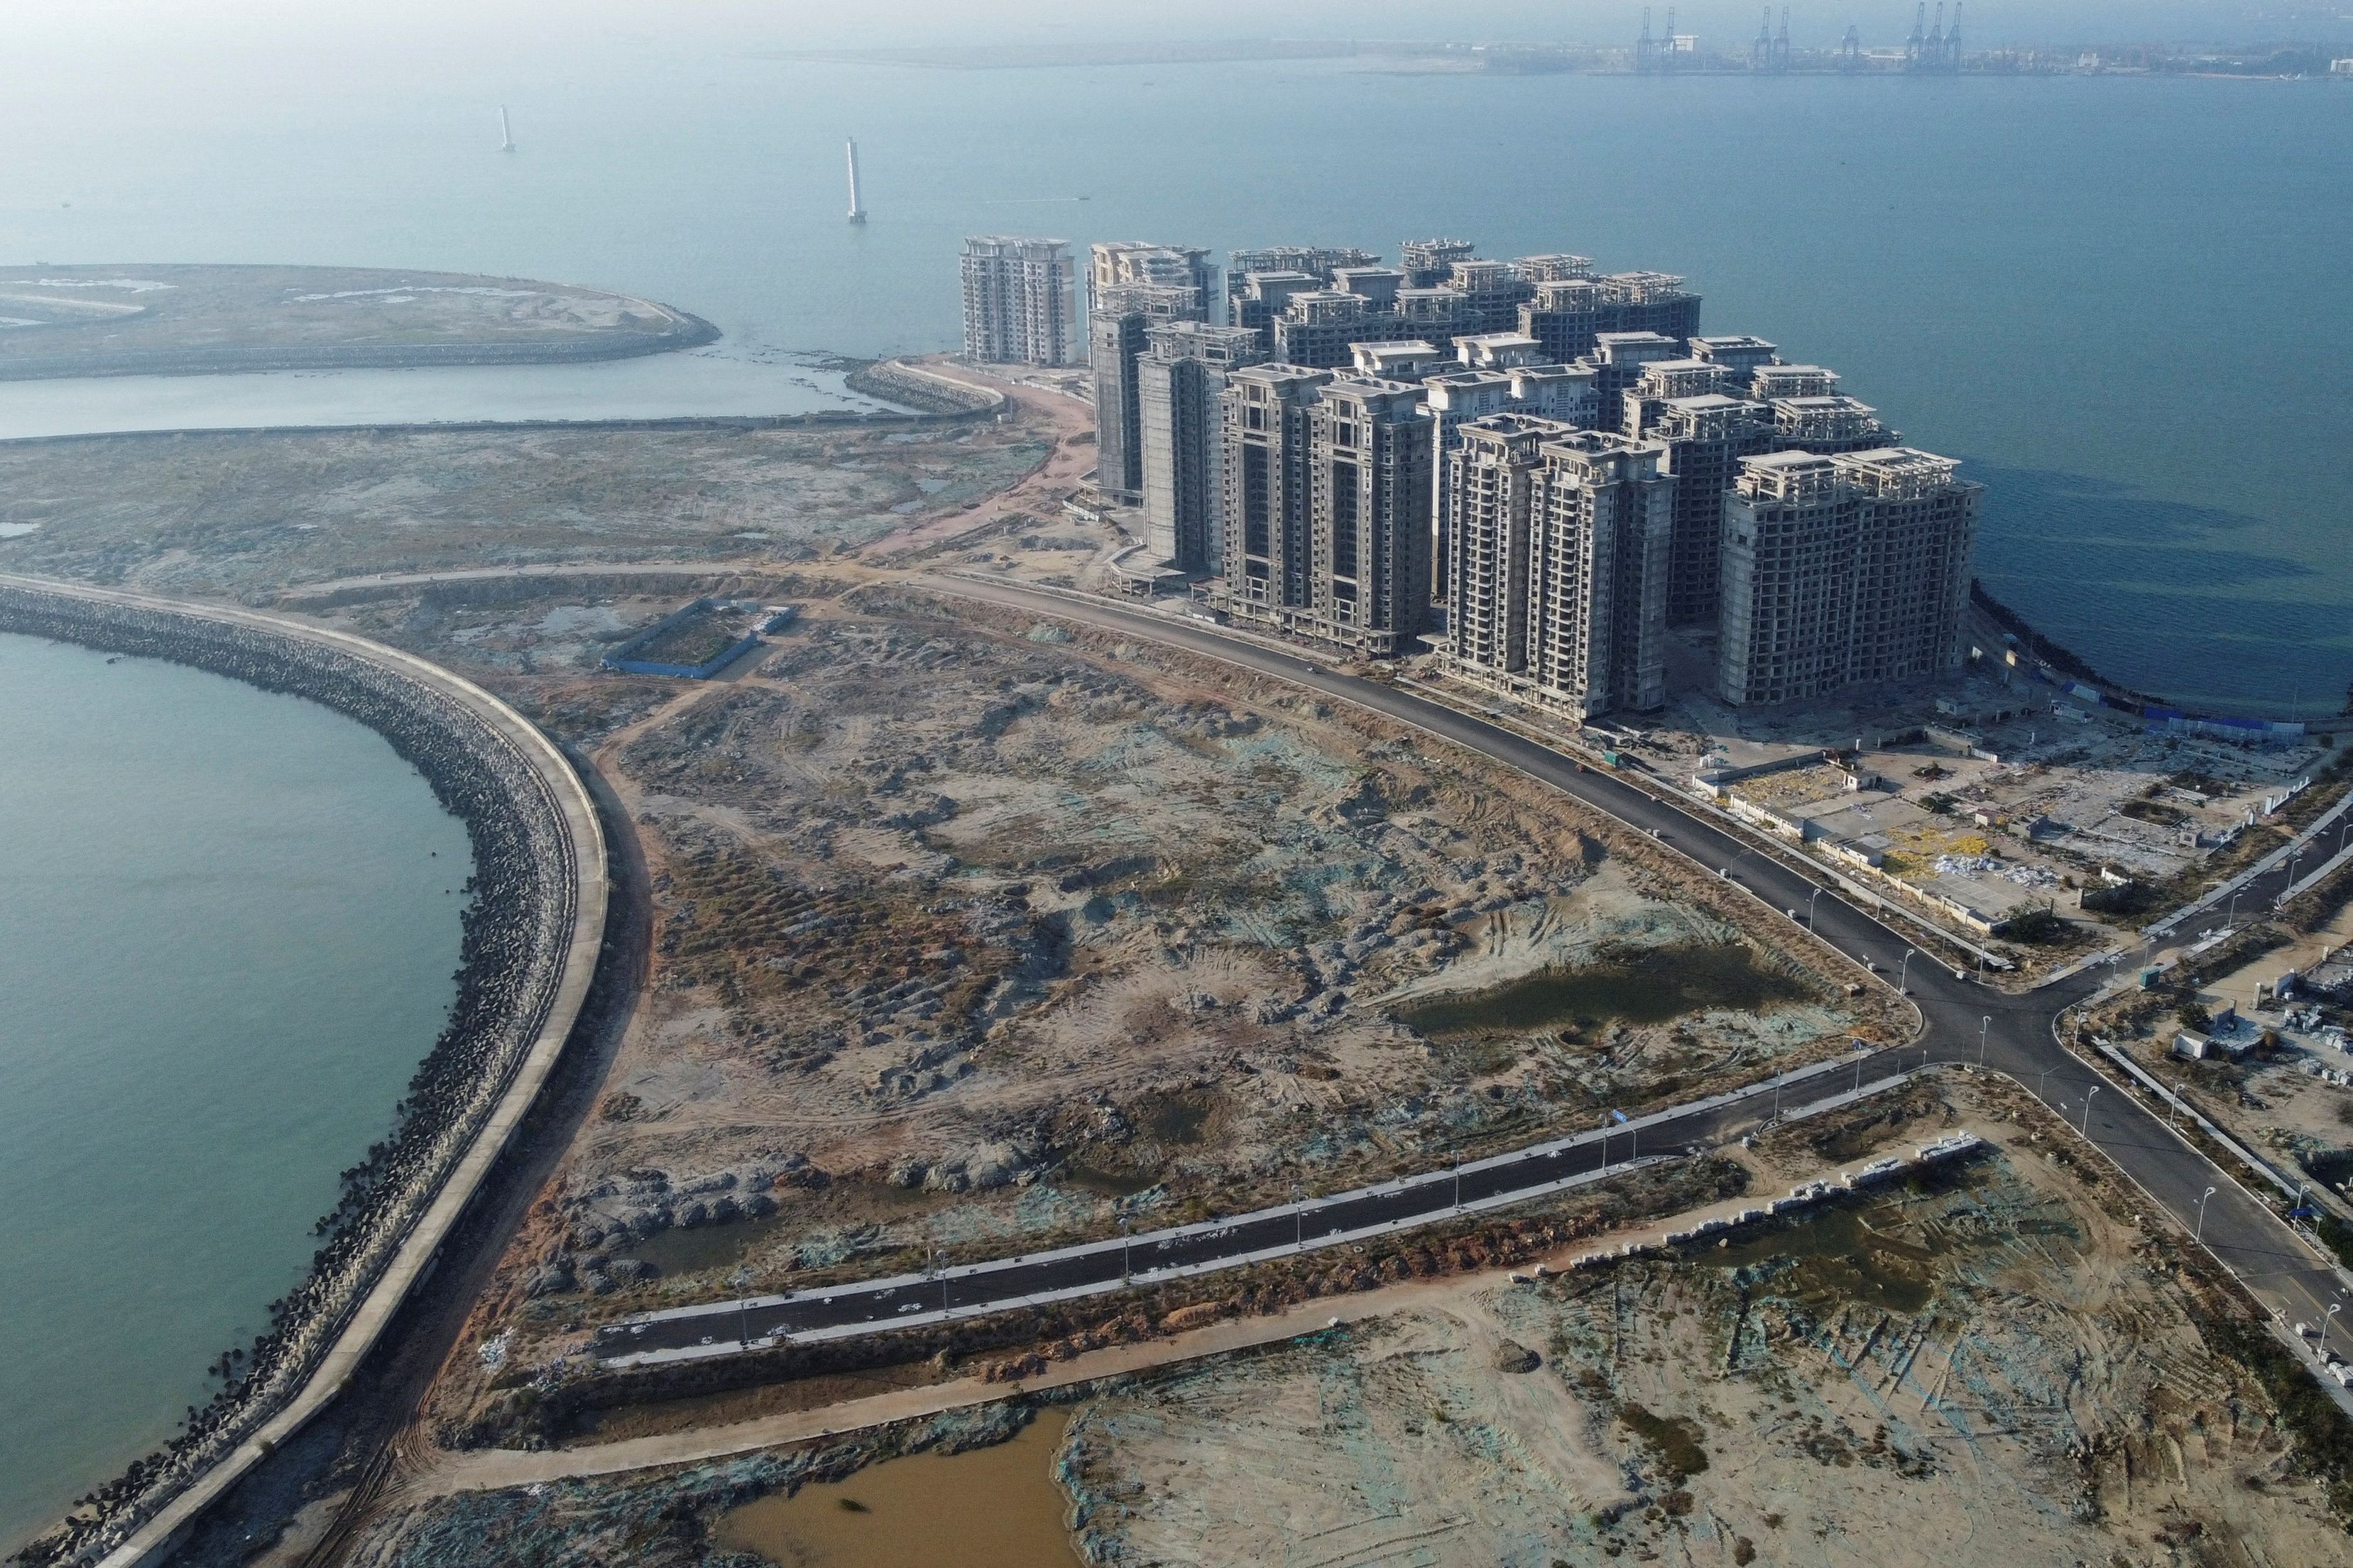 Buildings developed by China Evergrande Group on the manmade Ocean Flower Island in Danzhou